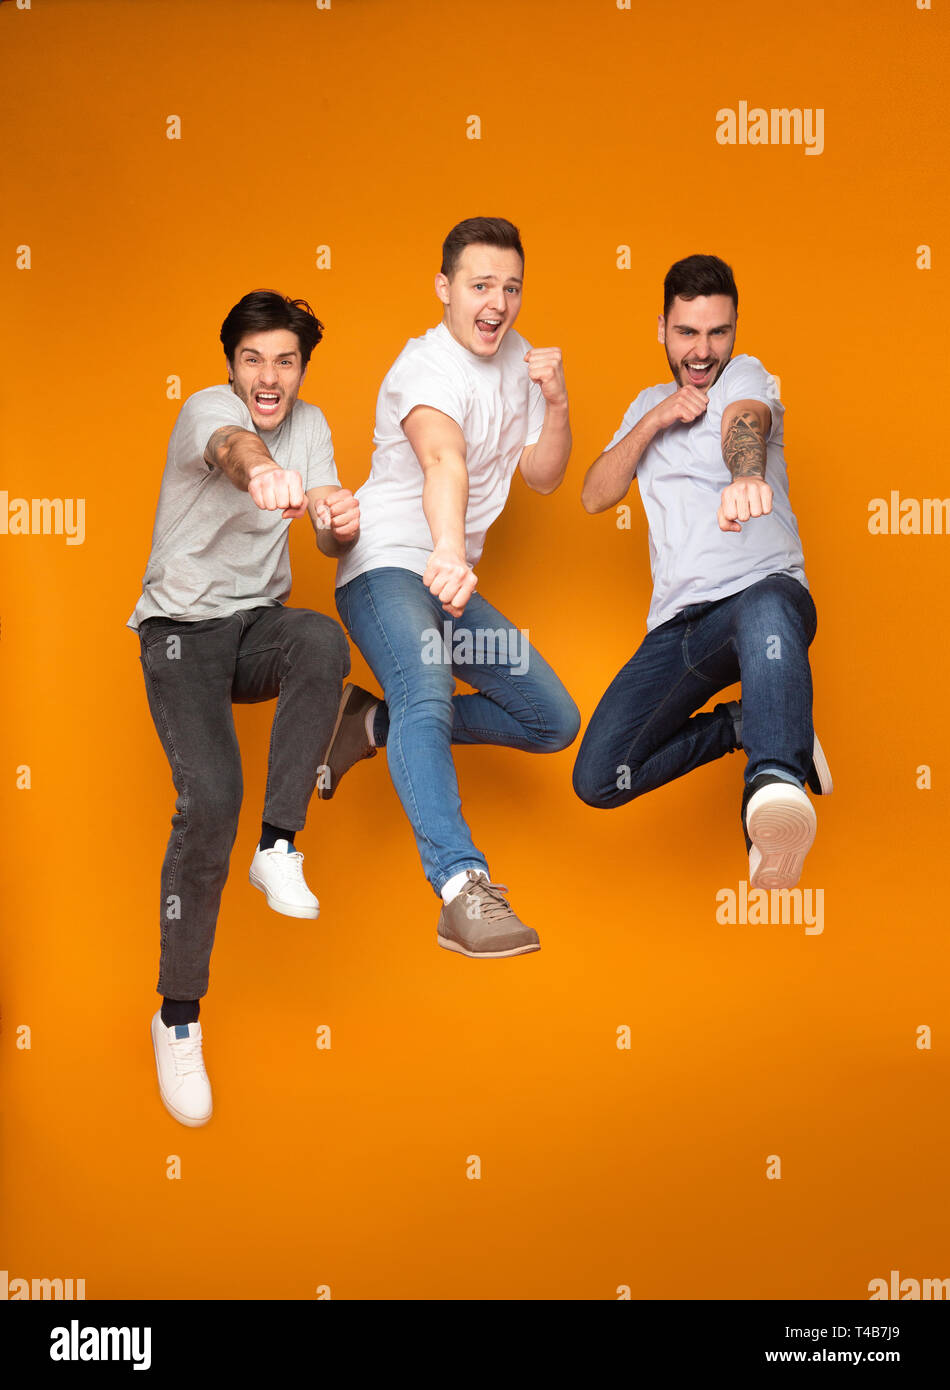 Three excited men jumping together, having fun Stock Photo